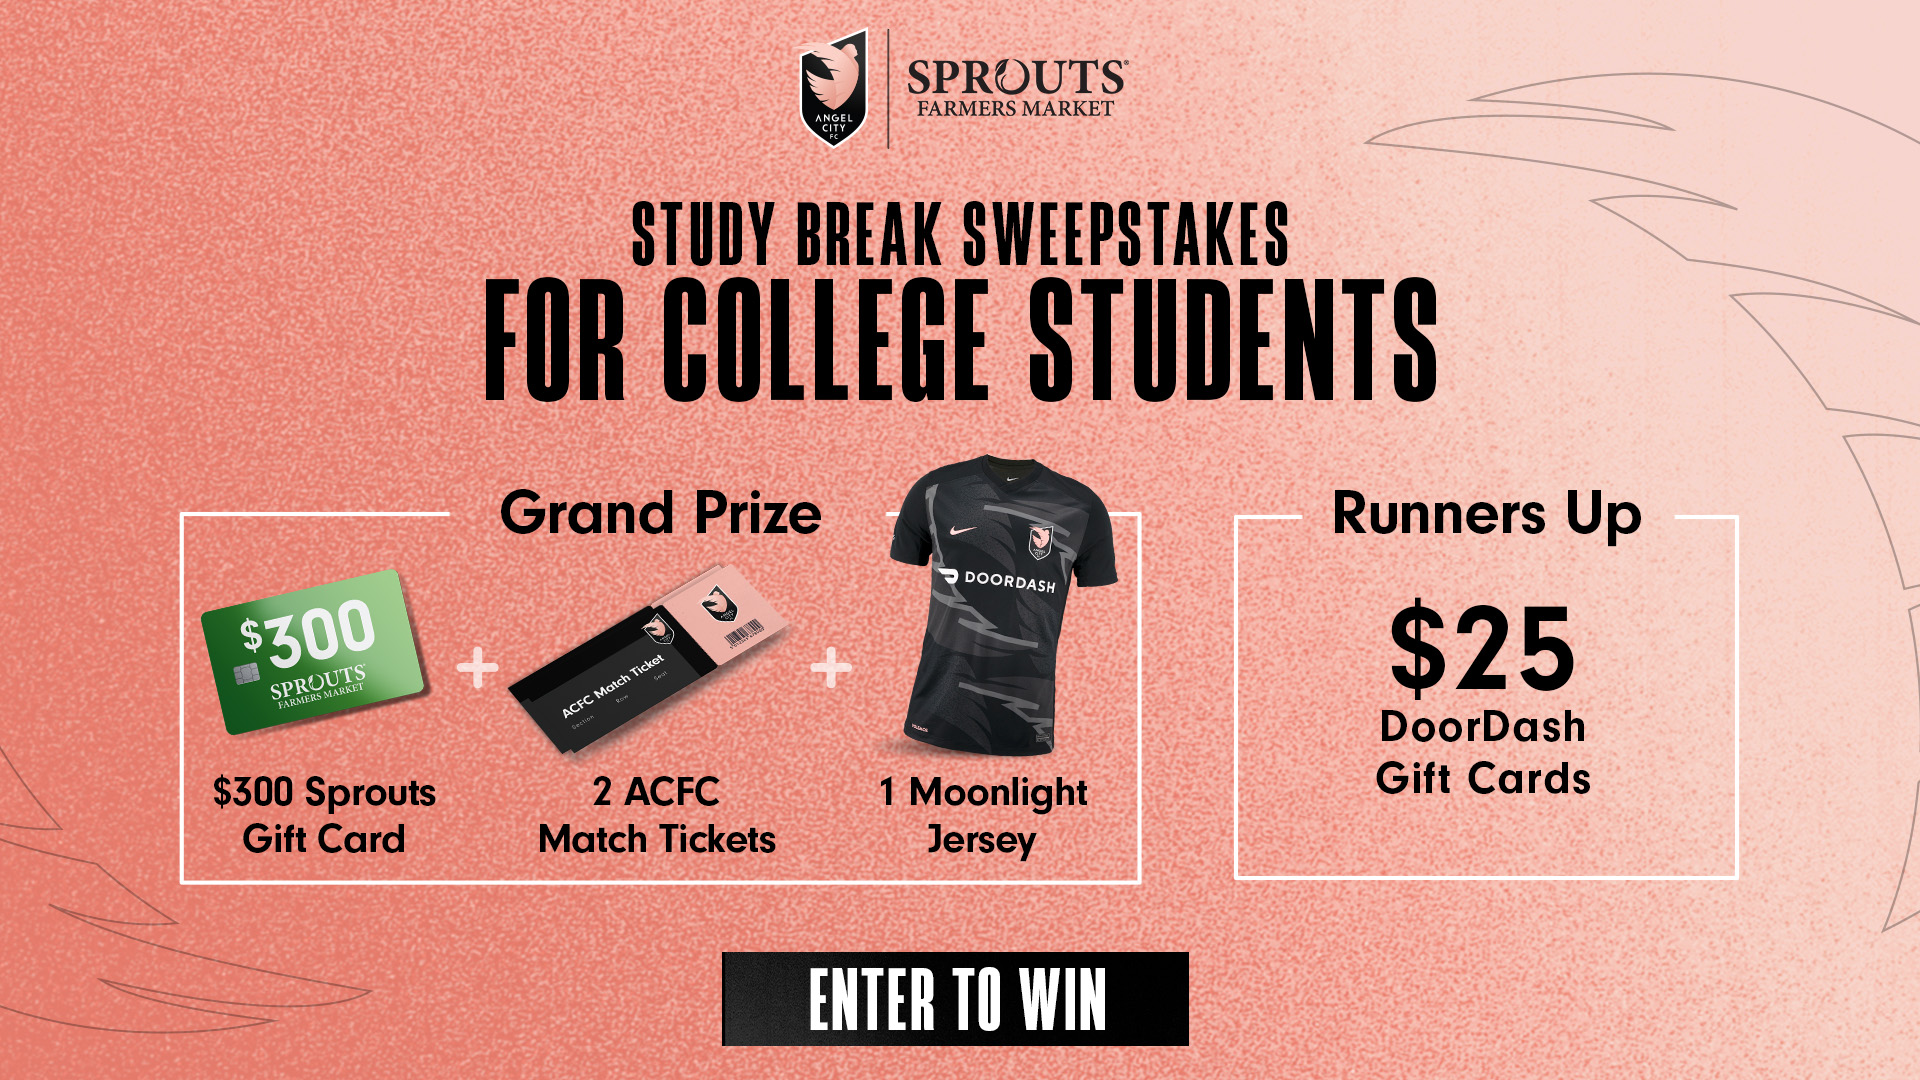 2024_PM_Sprouts_College_Sweepstakes_GIVEAWAY_16x9